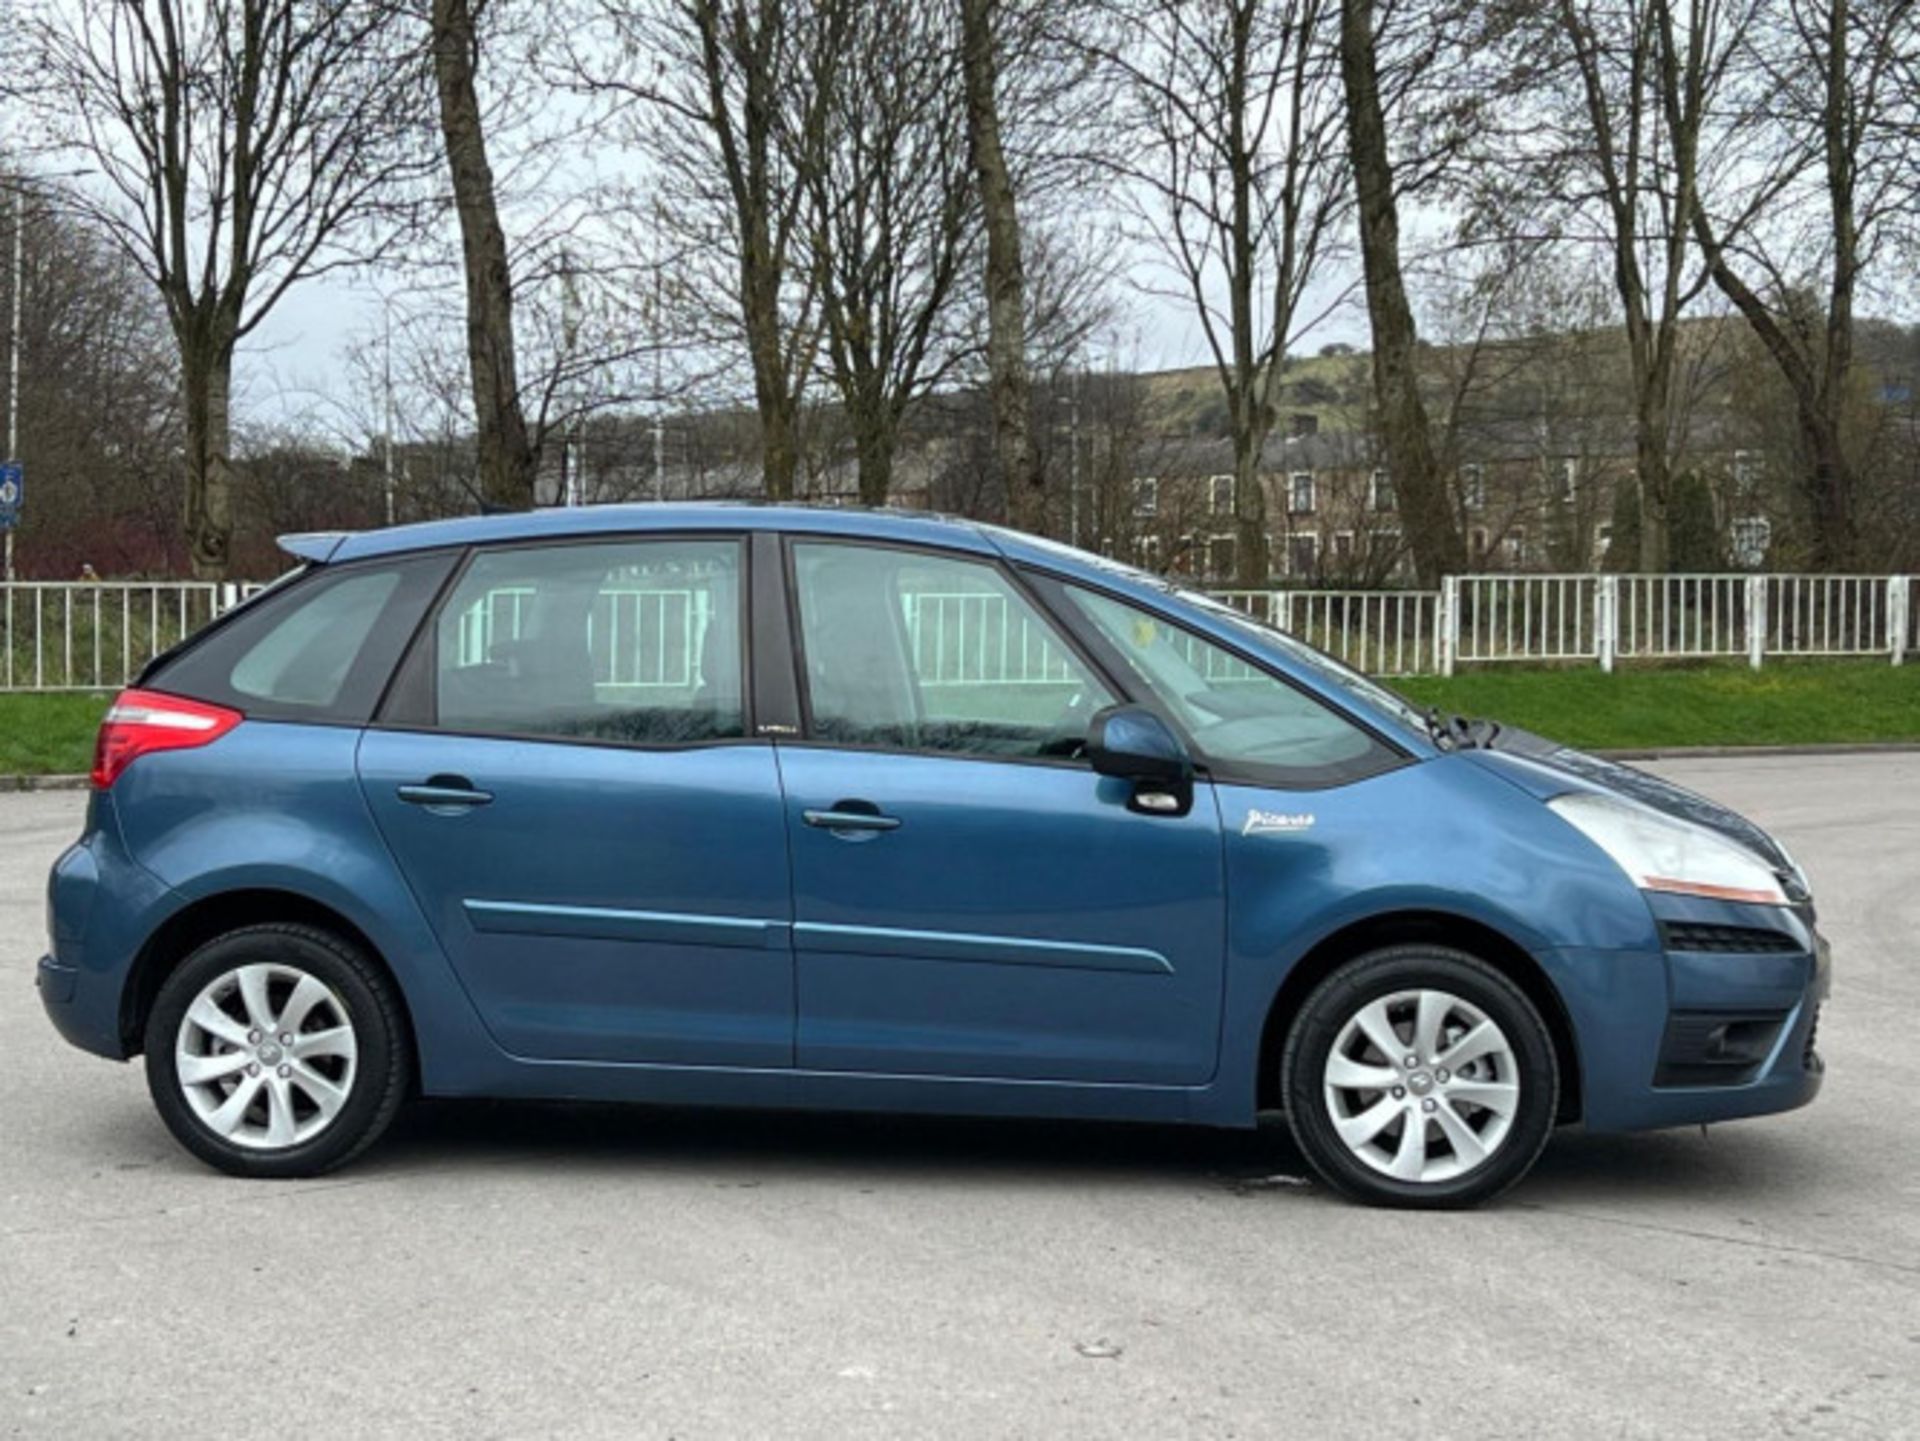 2009 CITROEN C4 PICASSO 1.6 HDI VTR+ EGS6 5DR >>--NO VAT ON HAMMER--<< - Image 119 of 123